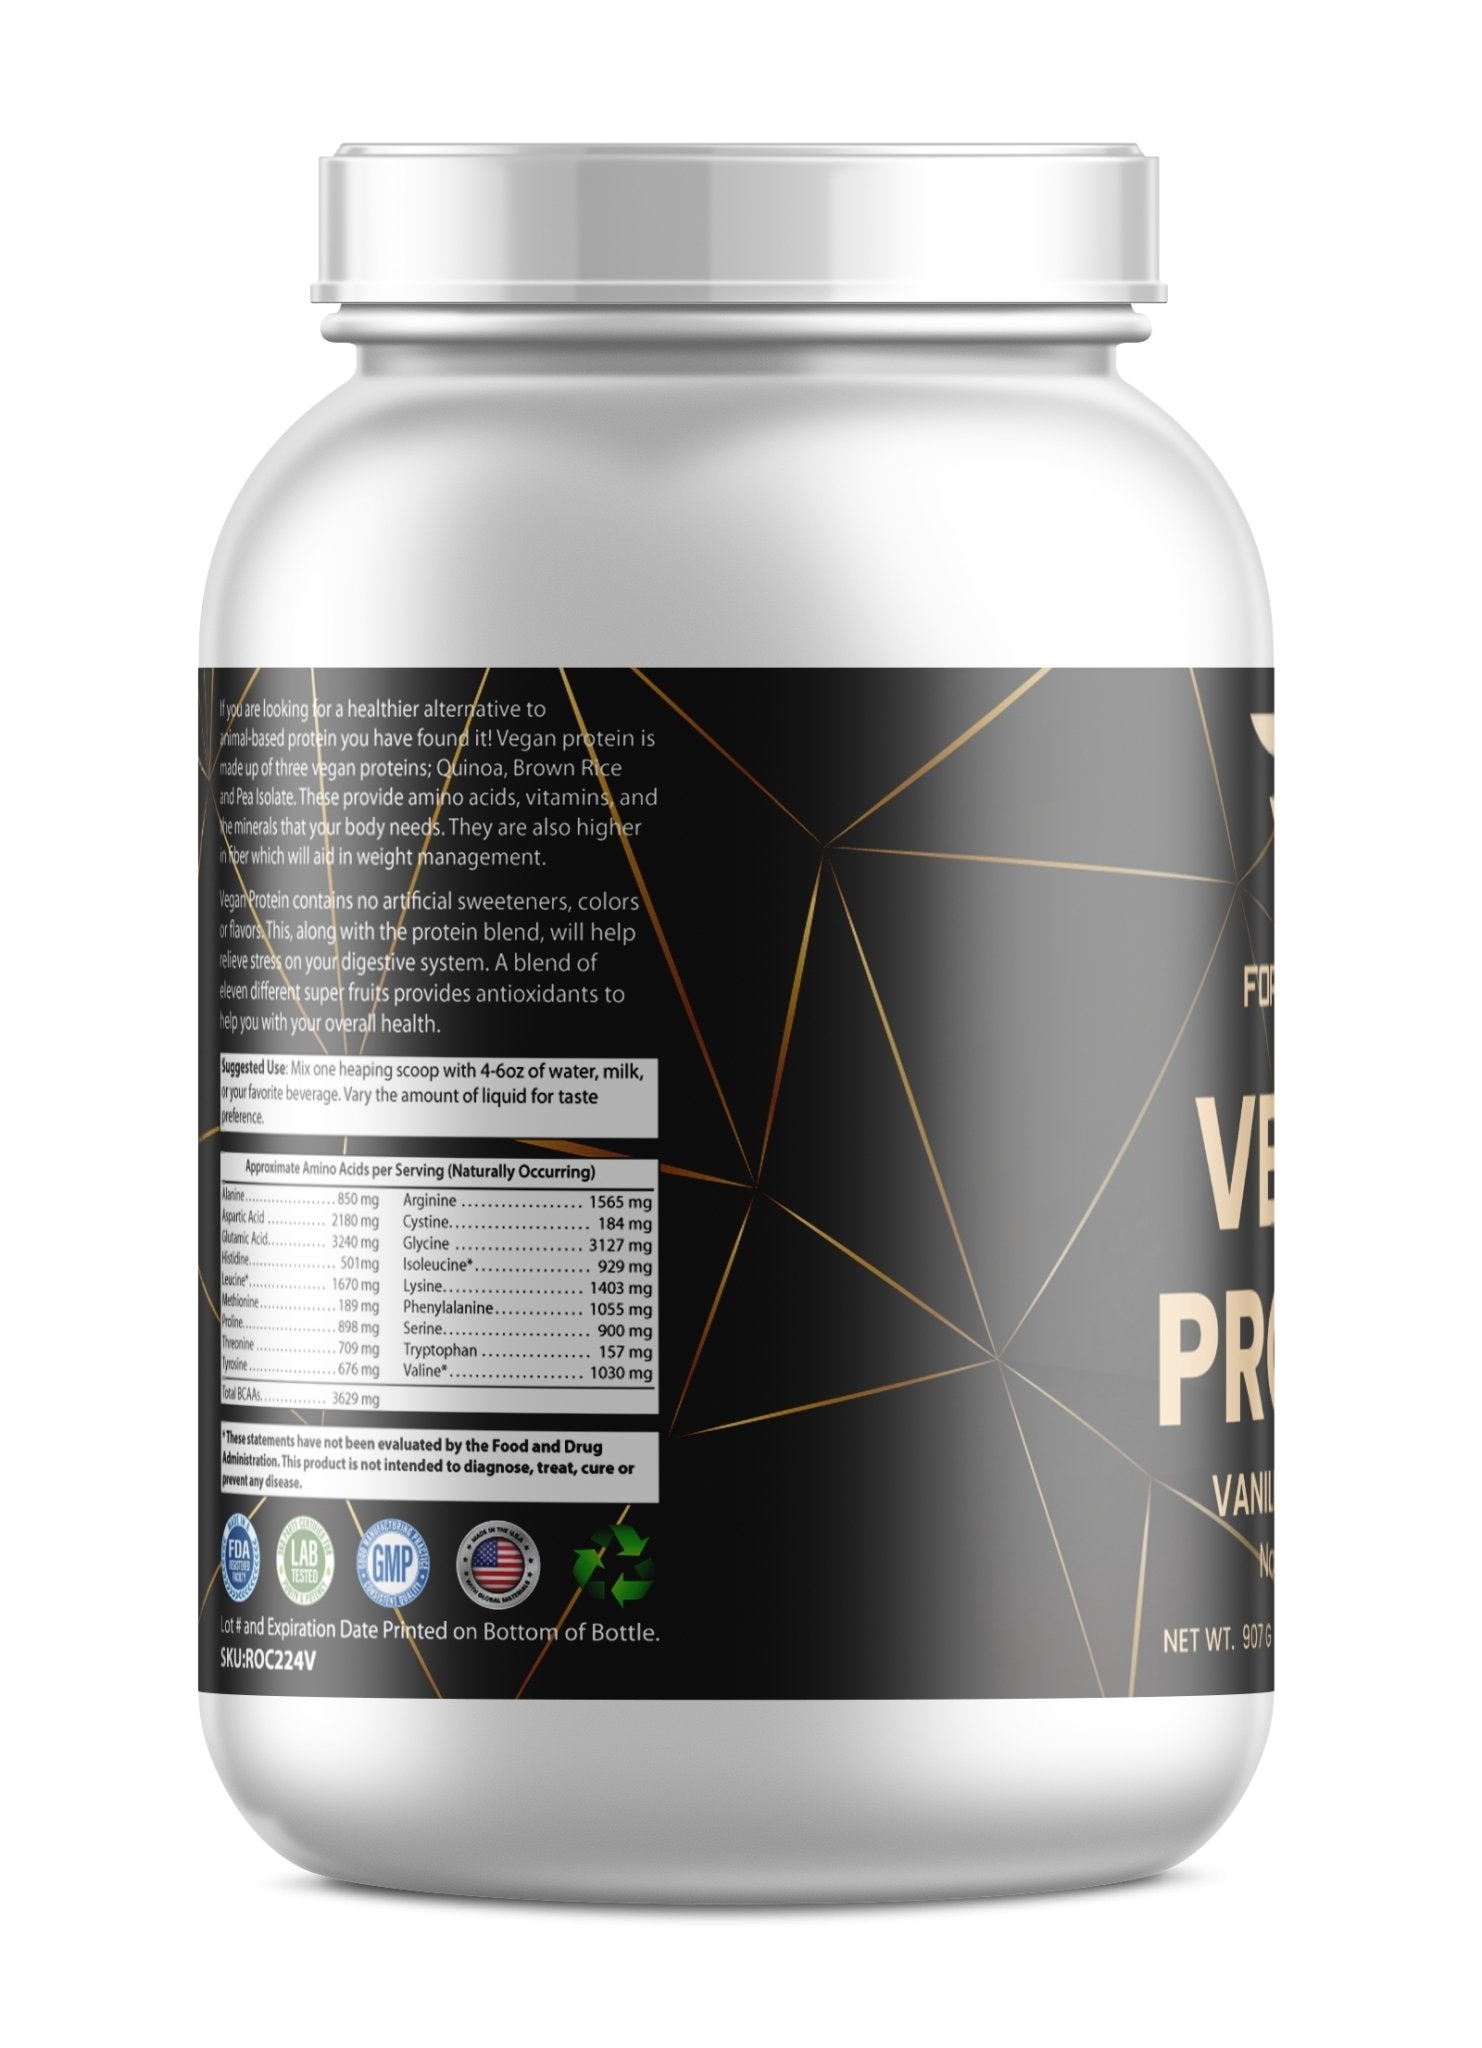 Organic Plant-Based Vanilla Vegan Protein Powder - 2 LB Natural & Healthy - For Fathers Fitness